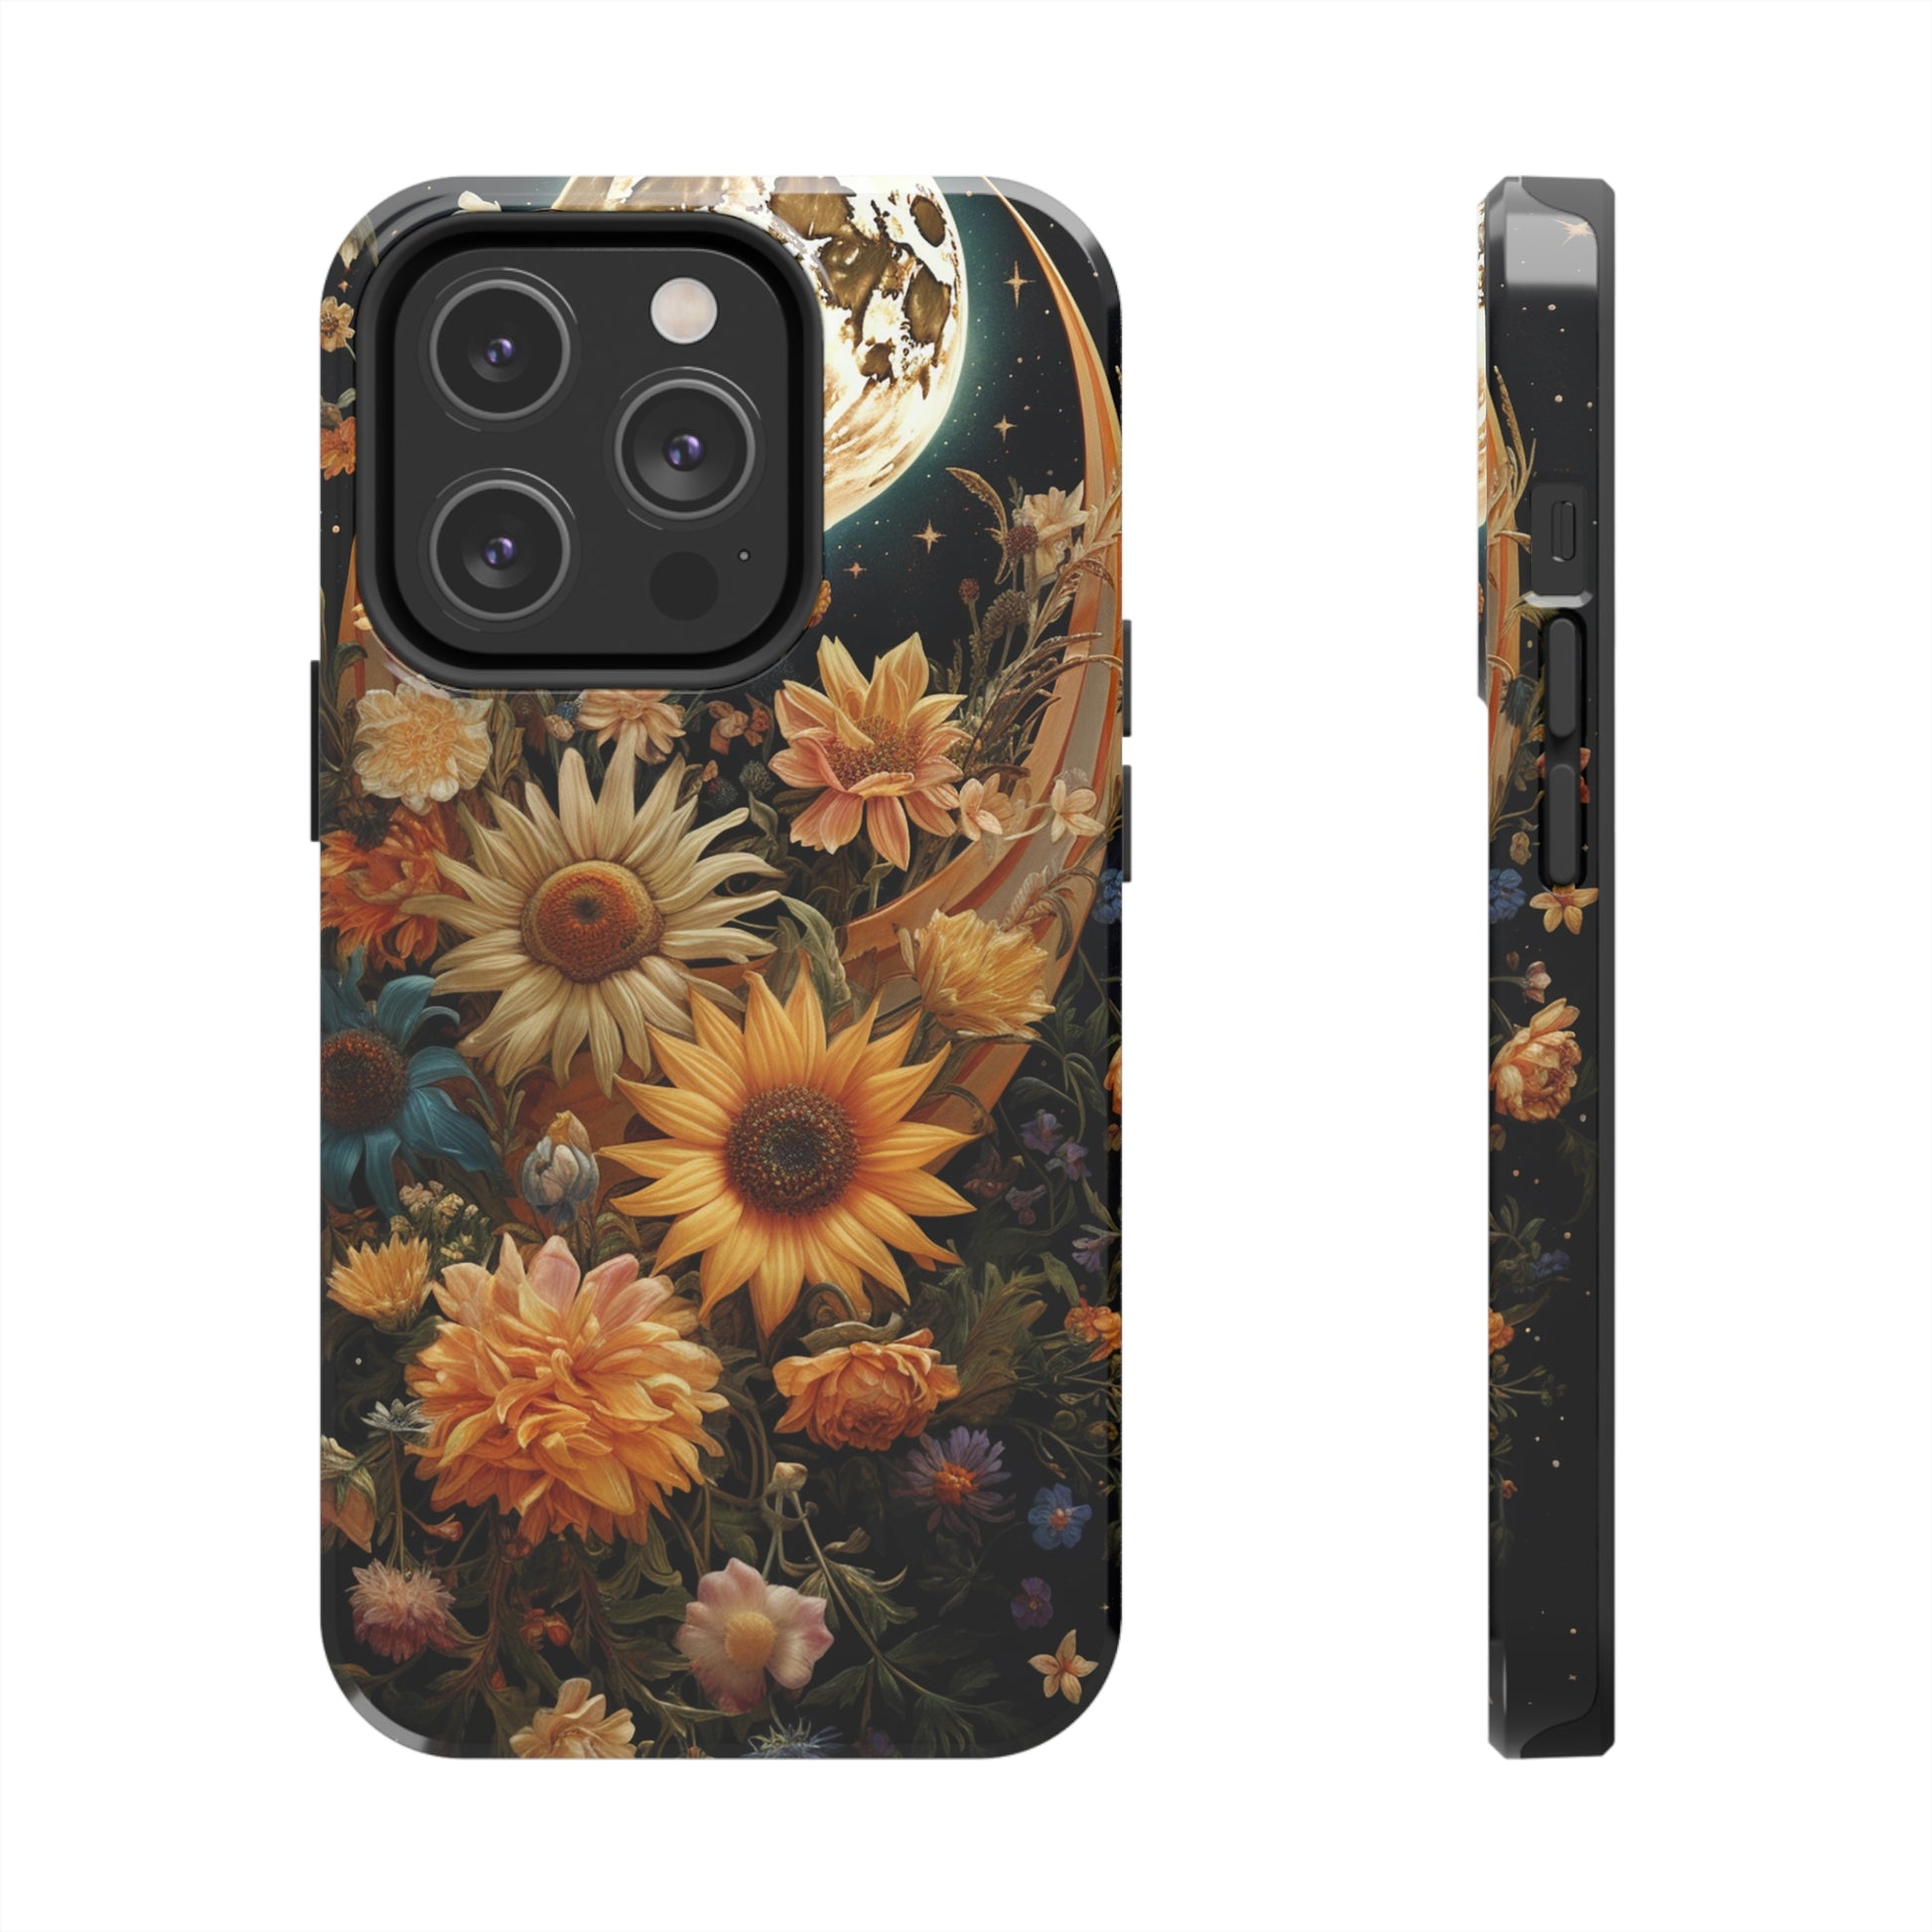 iPhone case evoking bohemian freedom and cottagecore serenity